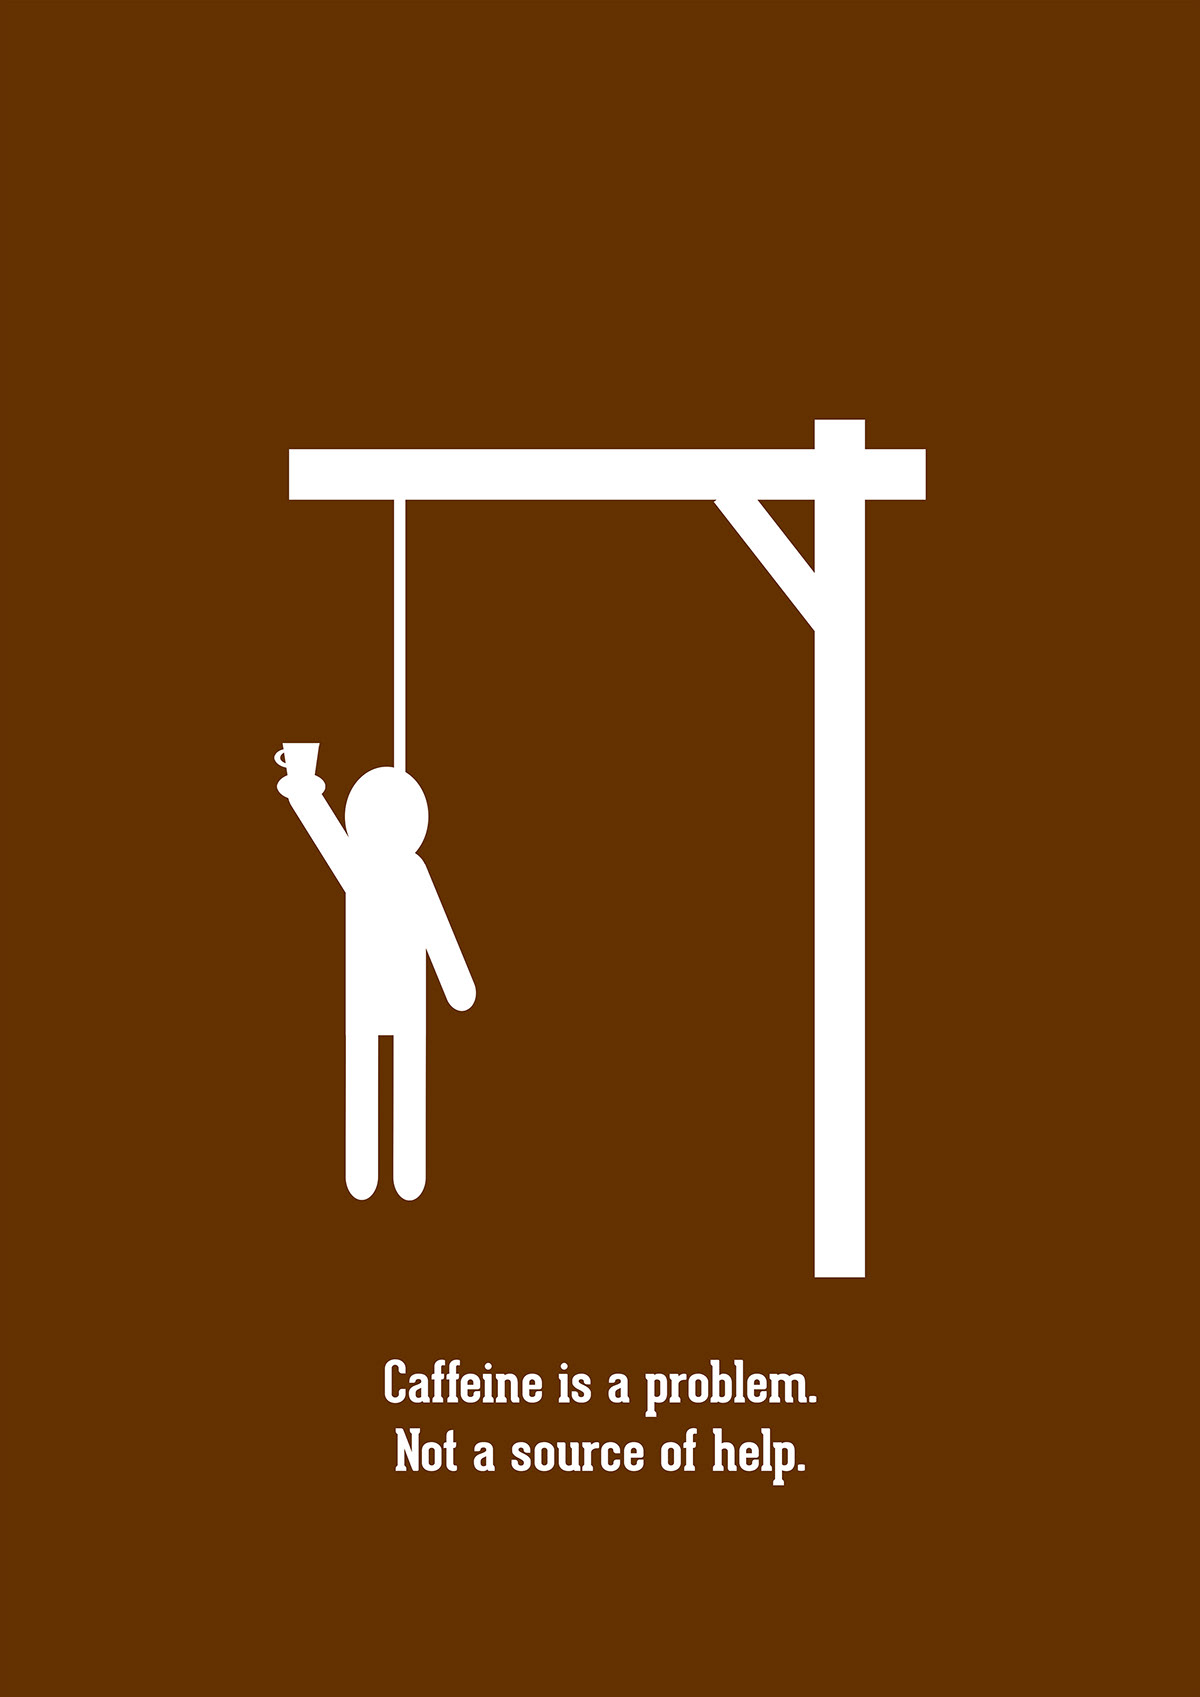 pictograms  coffee  caffeine reduction simplistic  poster  campaign